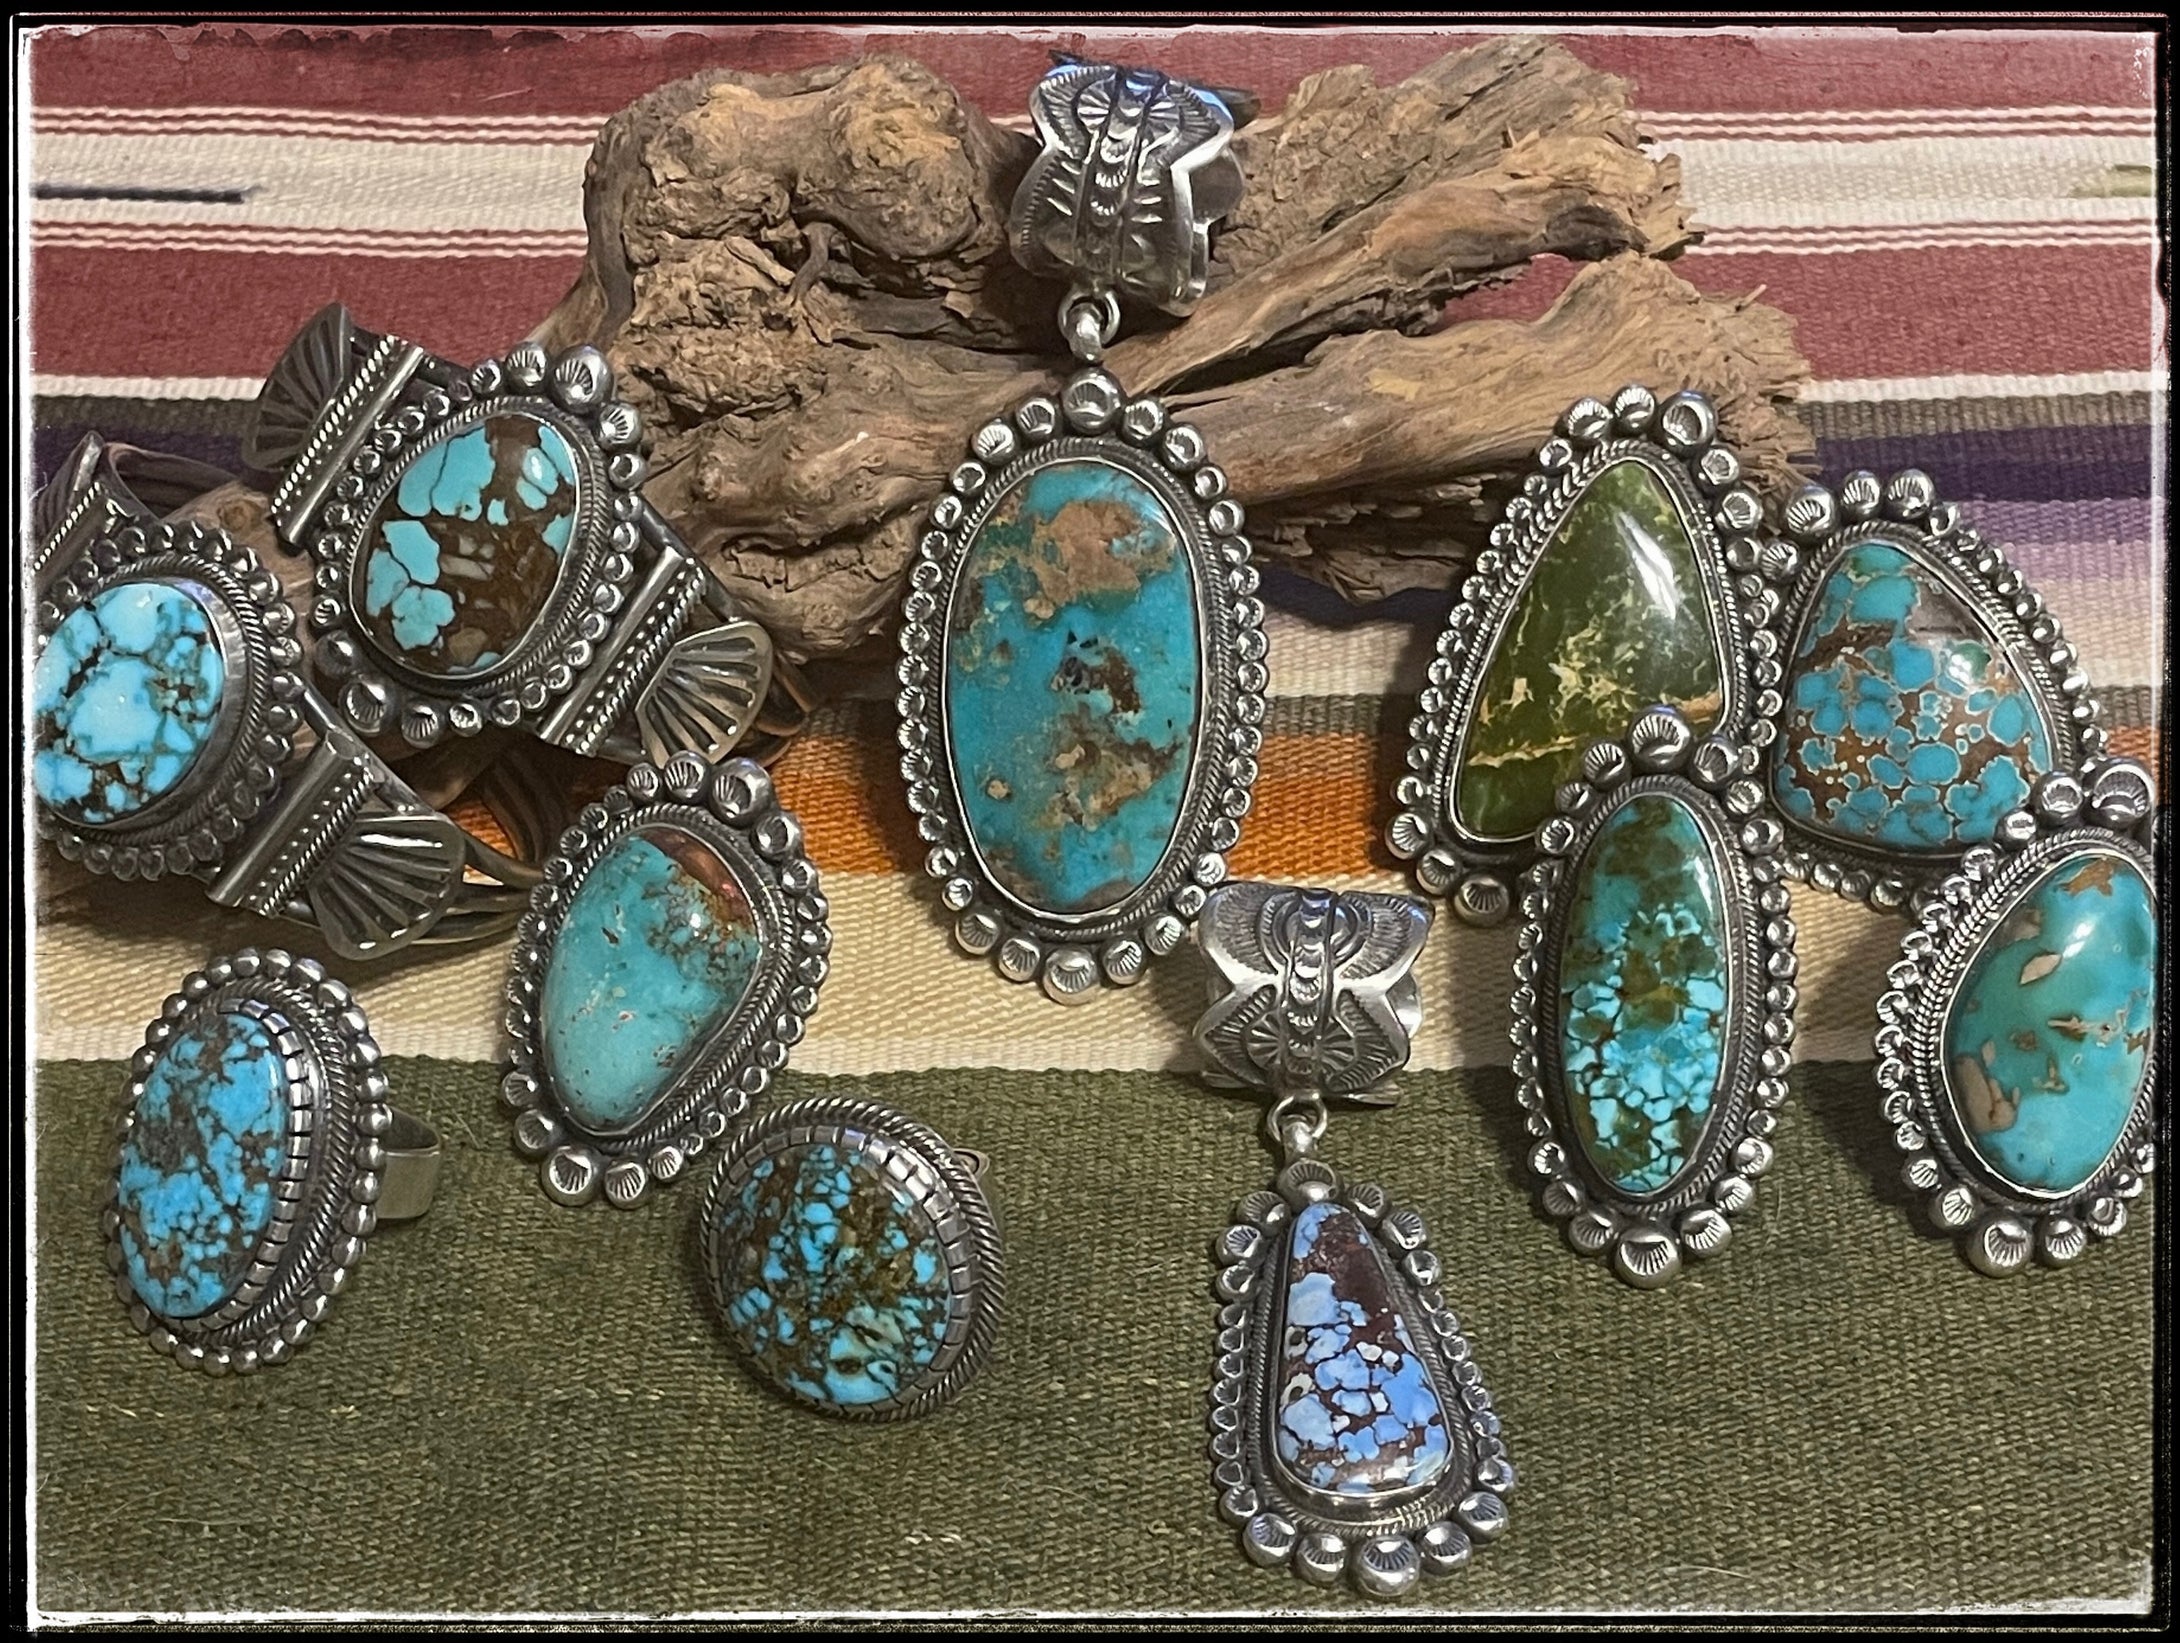 A collection of sterling silver and turquoise jewelry from Navajo silversmith Leon Martinez, including rings, pendants, and cuffs